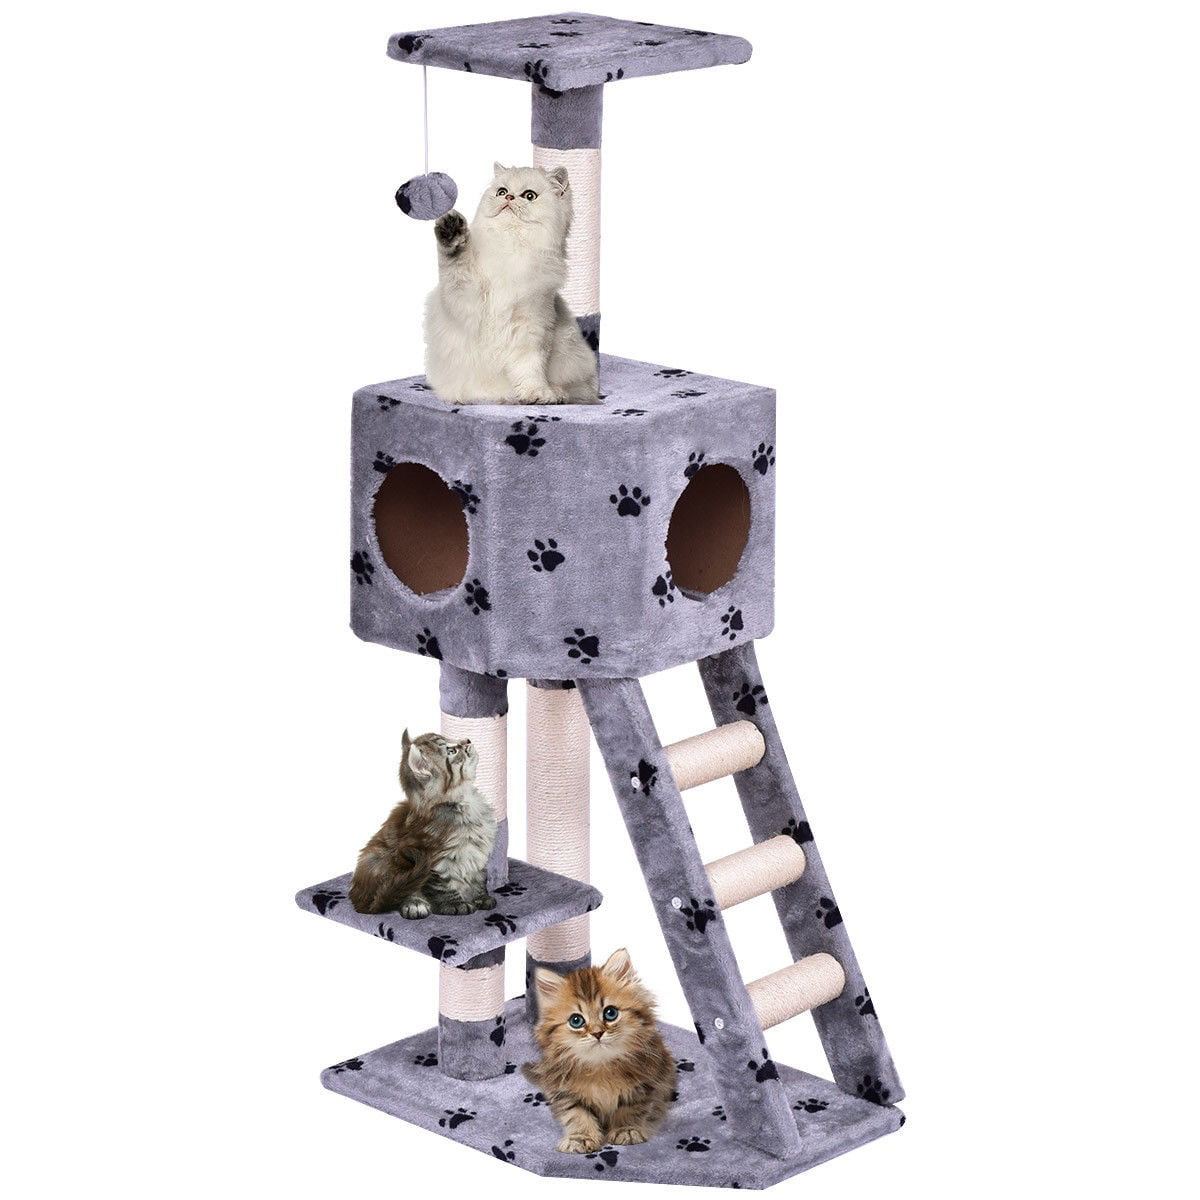 52"In/Outdoor Tower Condo Furniture Scratching Ladder Pet Cat Tree Toy Exquisite 